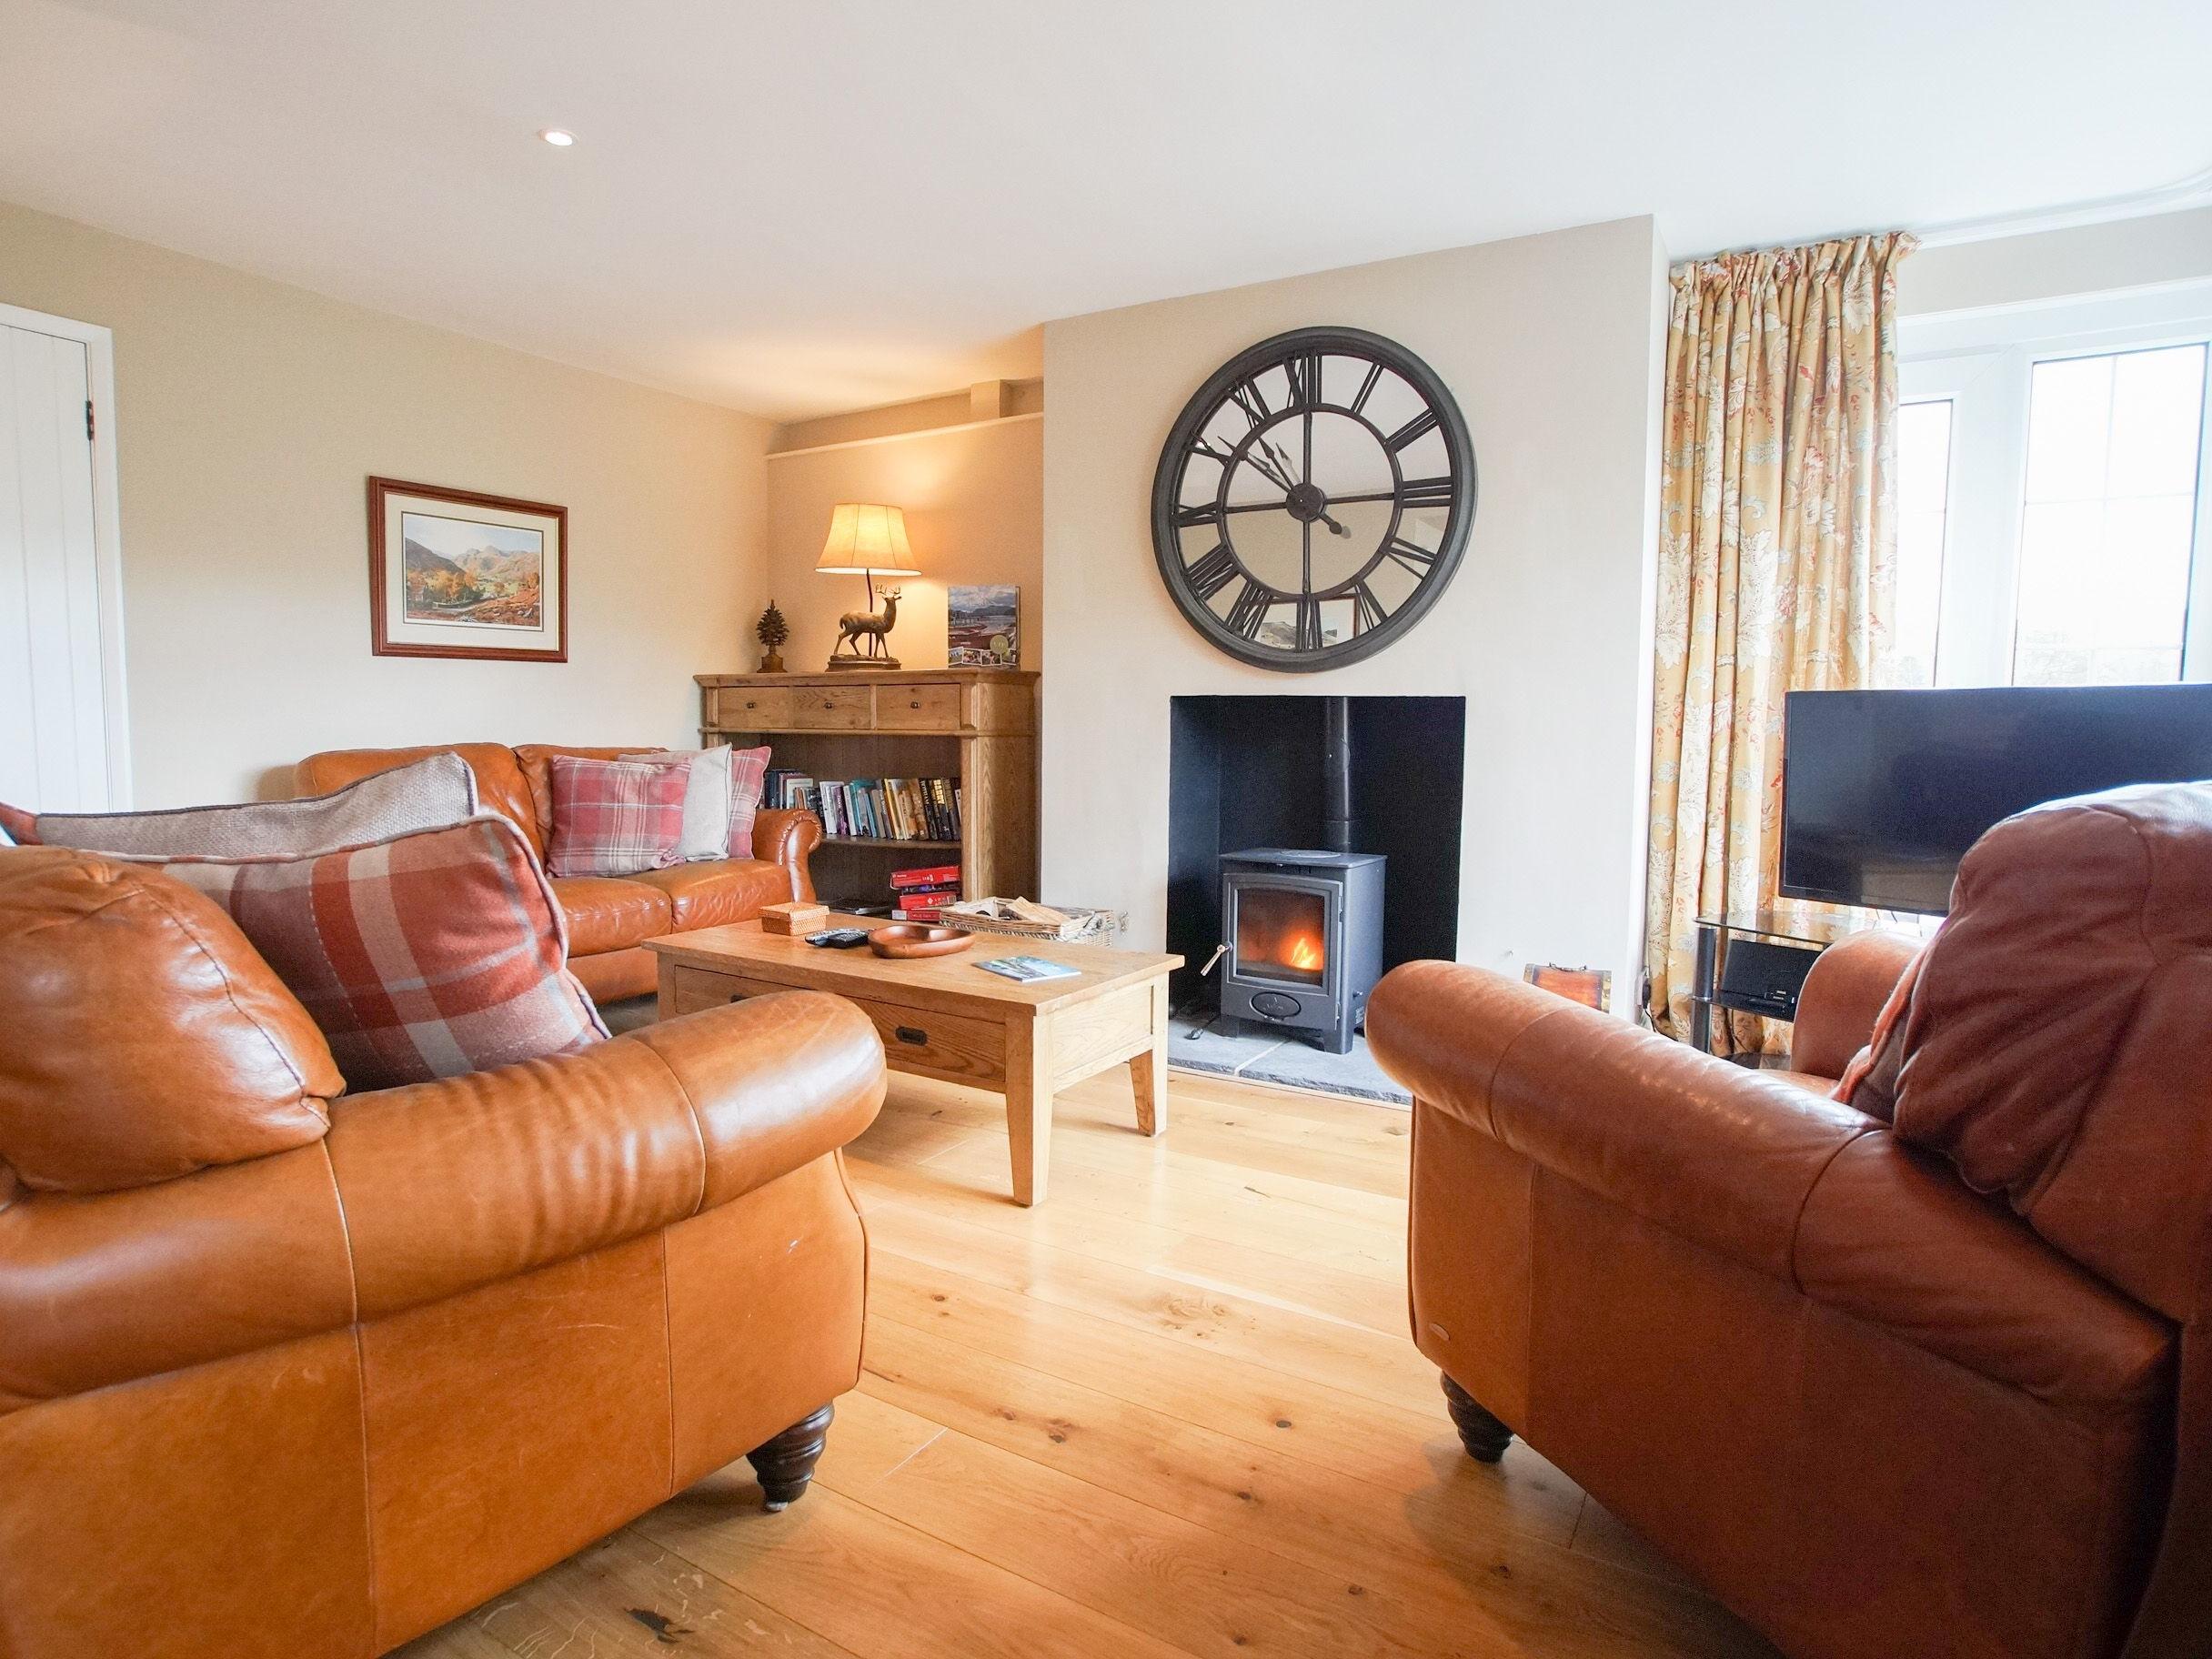 Holiday Cottage Reviews for Plumblands - Self Catering Property in Ambleside, Cumbria